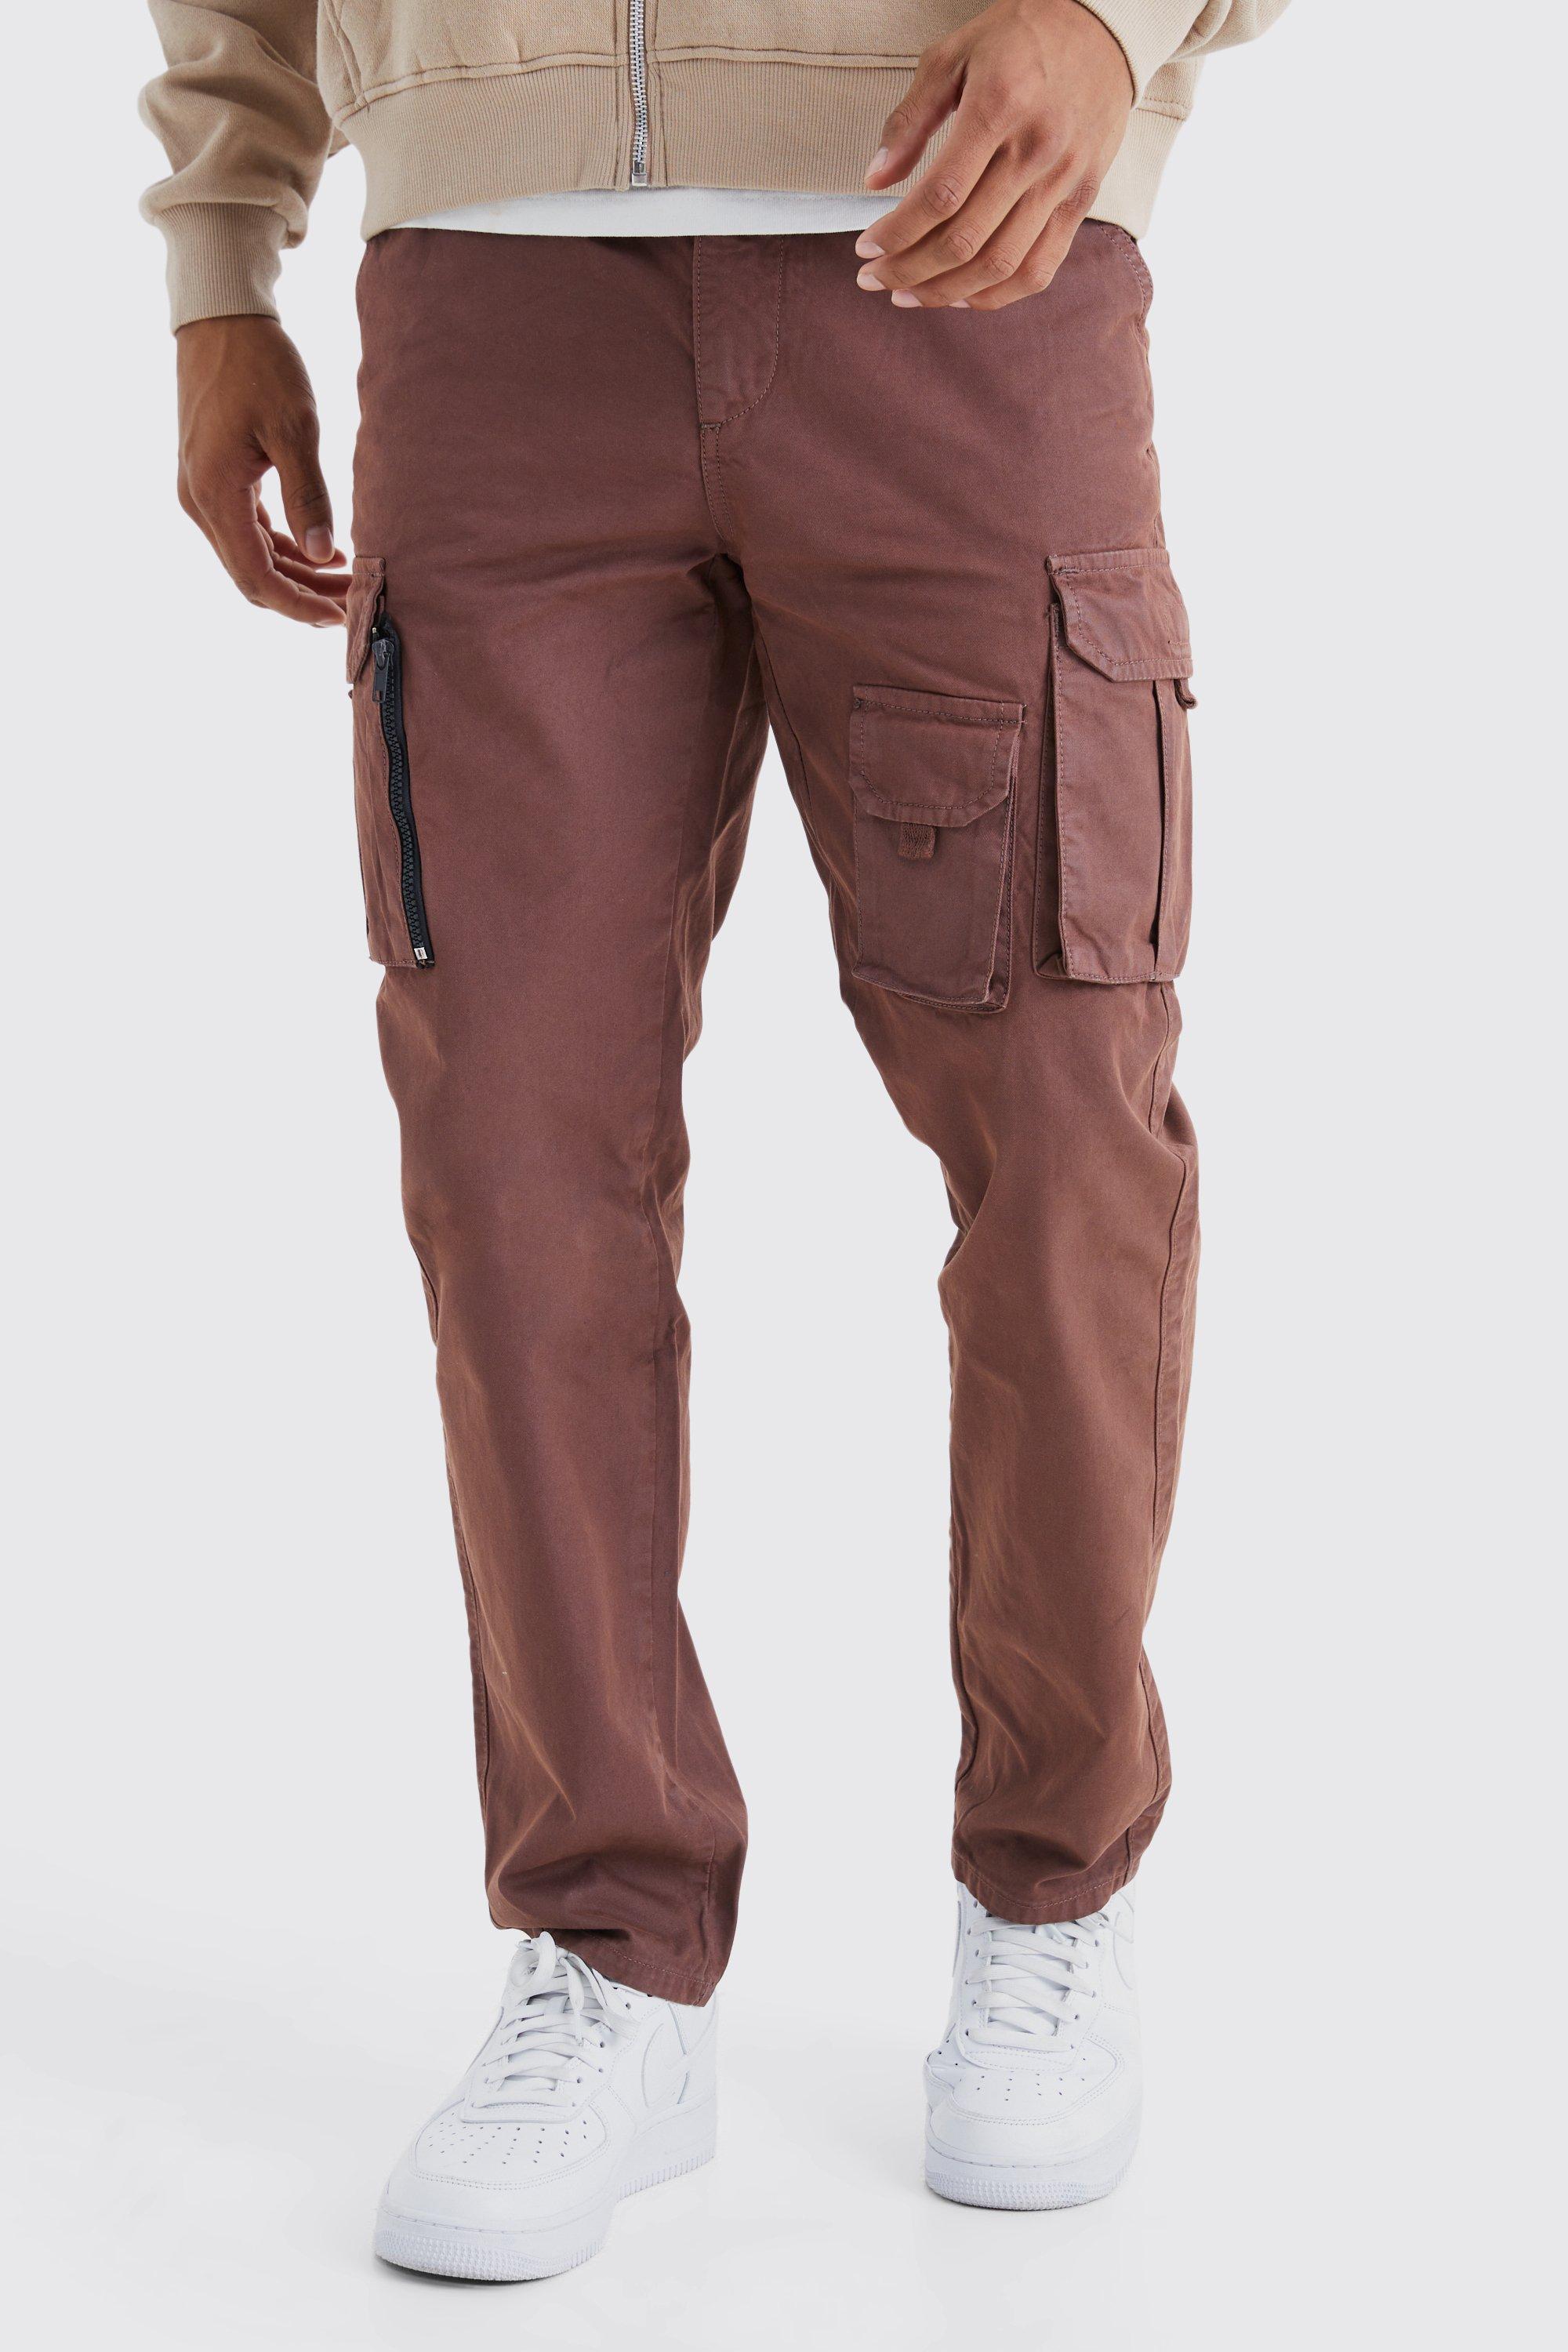 Men's Straight Leg Multi Cargo Trouser With Woven Tab - Brown - 28, Brown